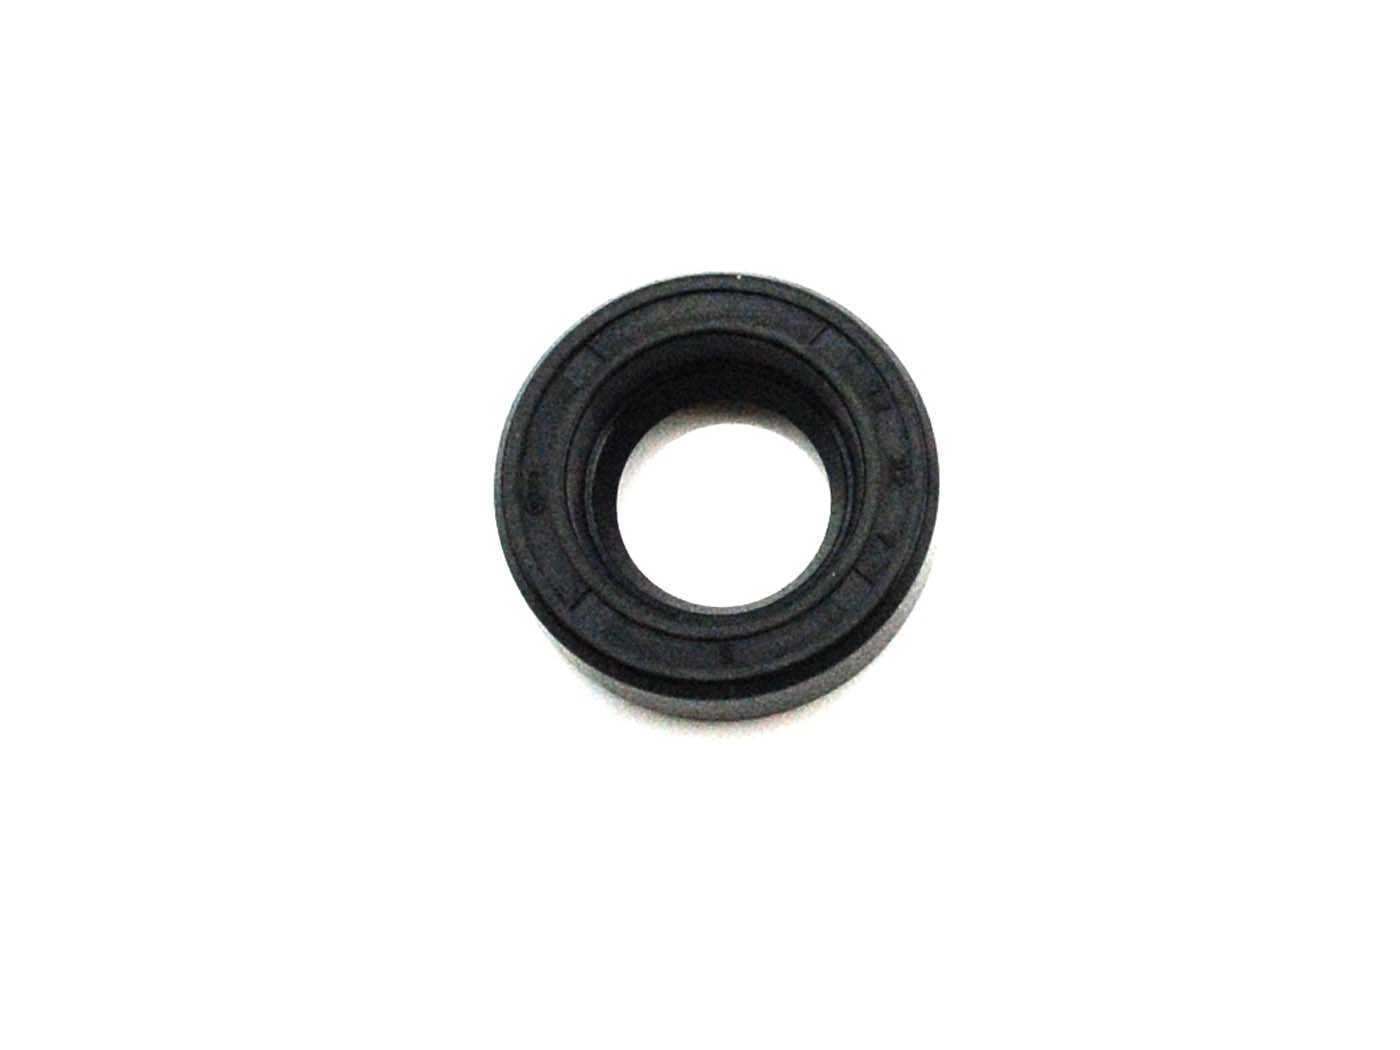 Jaws Clutch Oil Seal Solo 712 713 725 726 730 731 732 Mars 2000